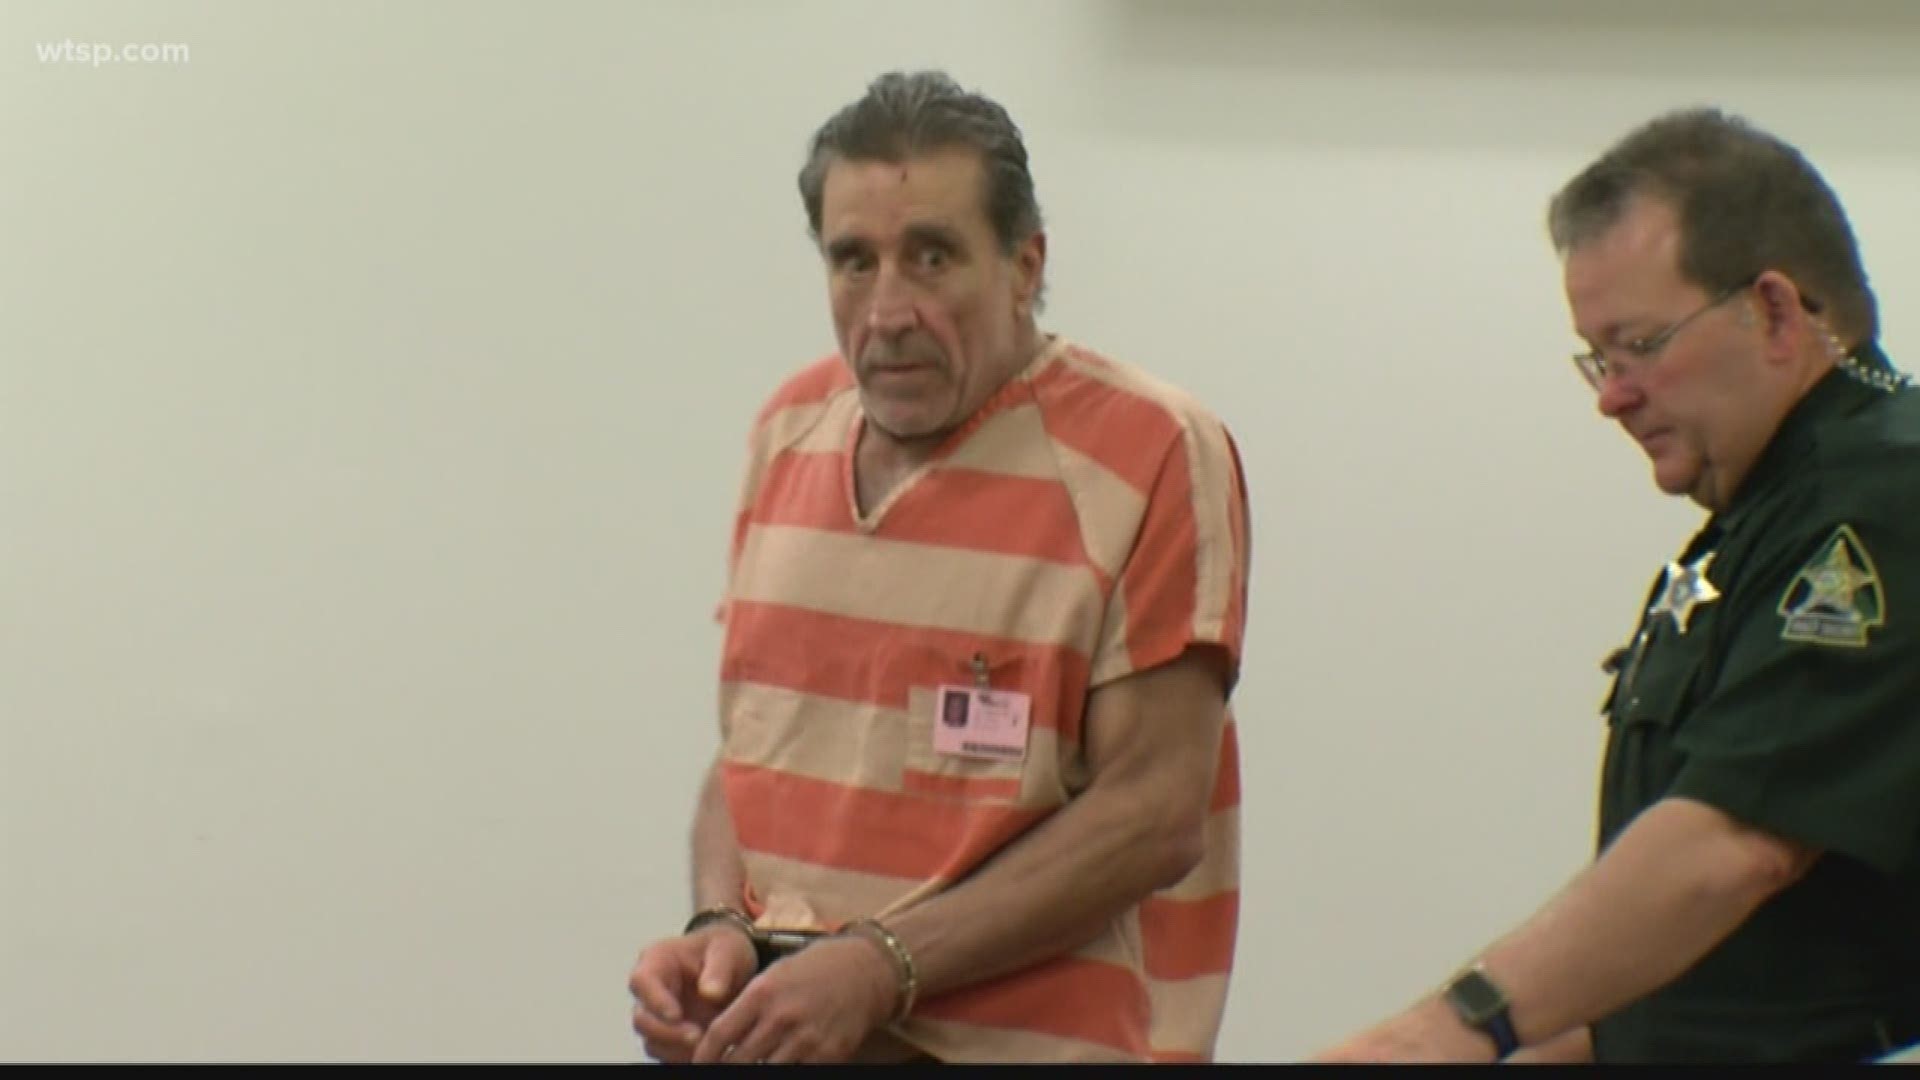 Dale Massad is accused of using "crack cocaine and meth" daily, stitching-up a friend on his kitchen table and of shooting at law enforcement officers. https://on.wtsp.com/2IvuG8x